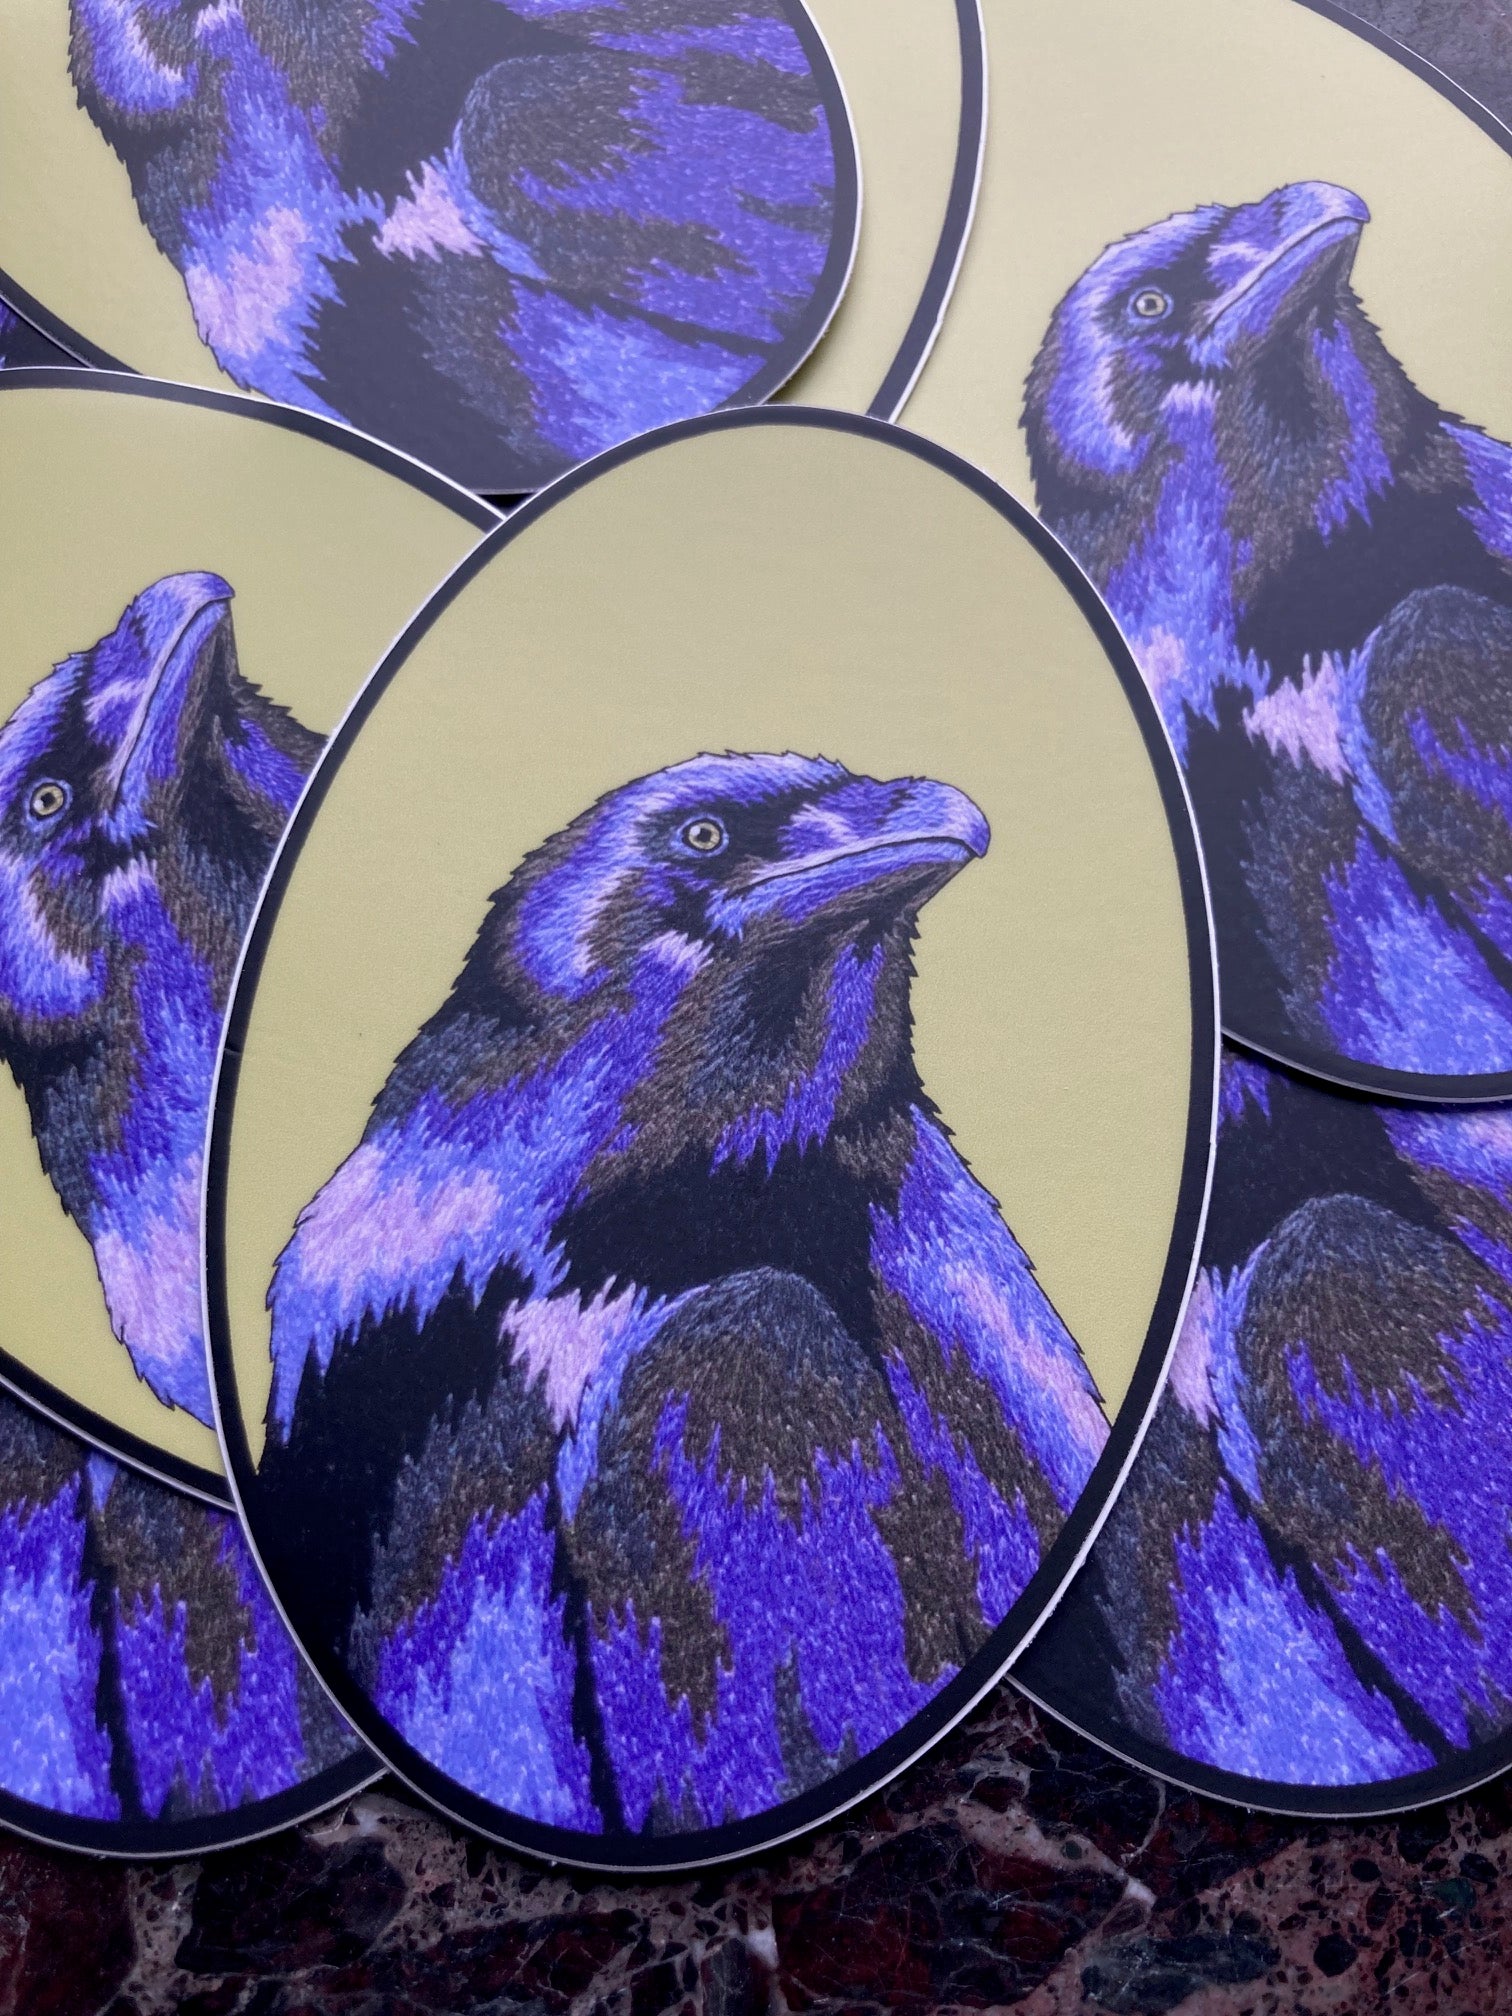 A pile of oval stickers sits atop a dark marble surface. The stickers depict an embroidered raven in deep periwinkle purples and greys against a green background. 